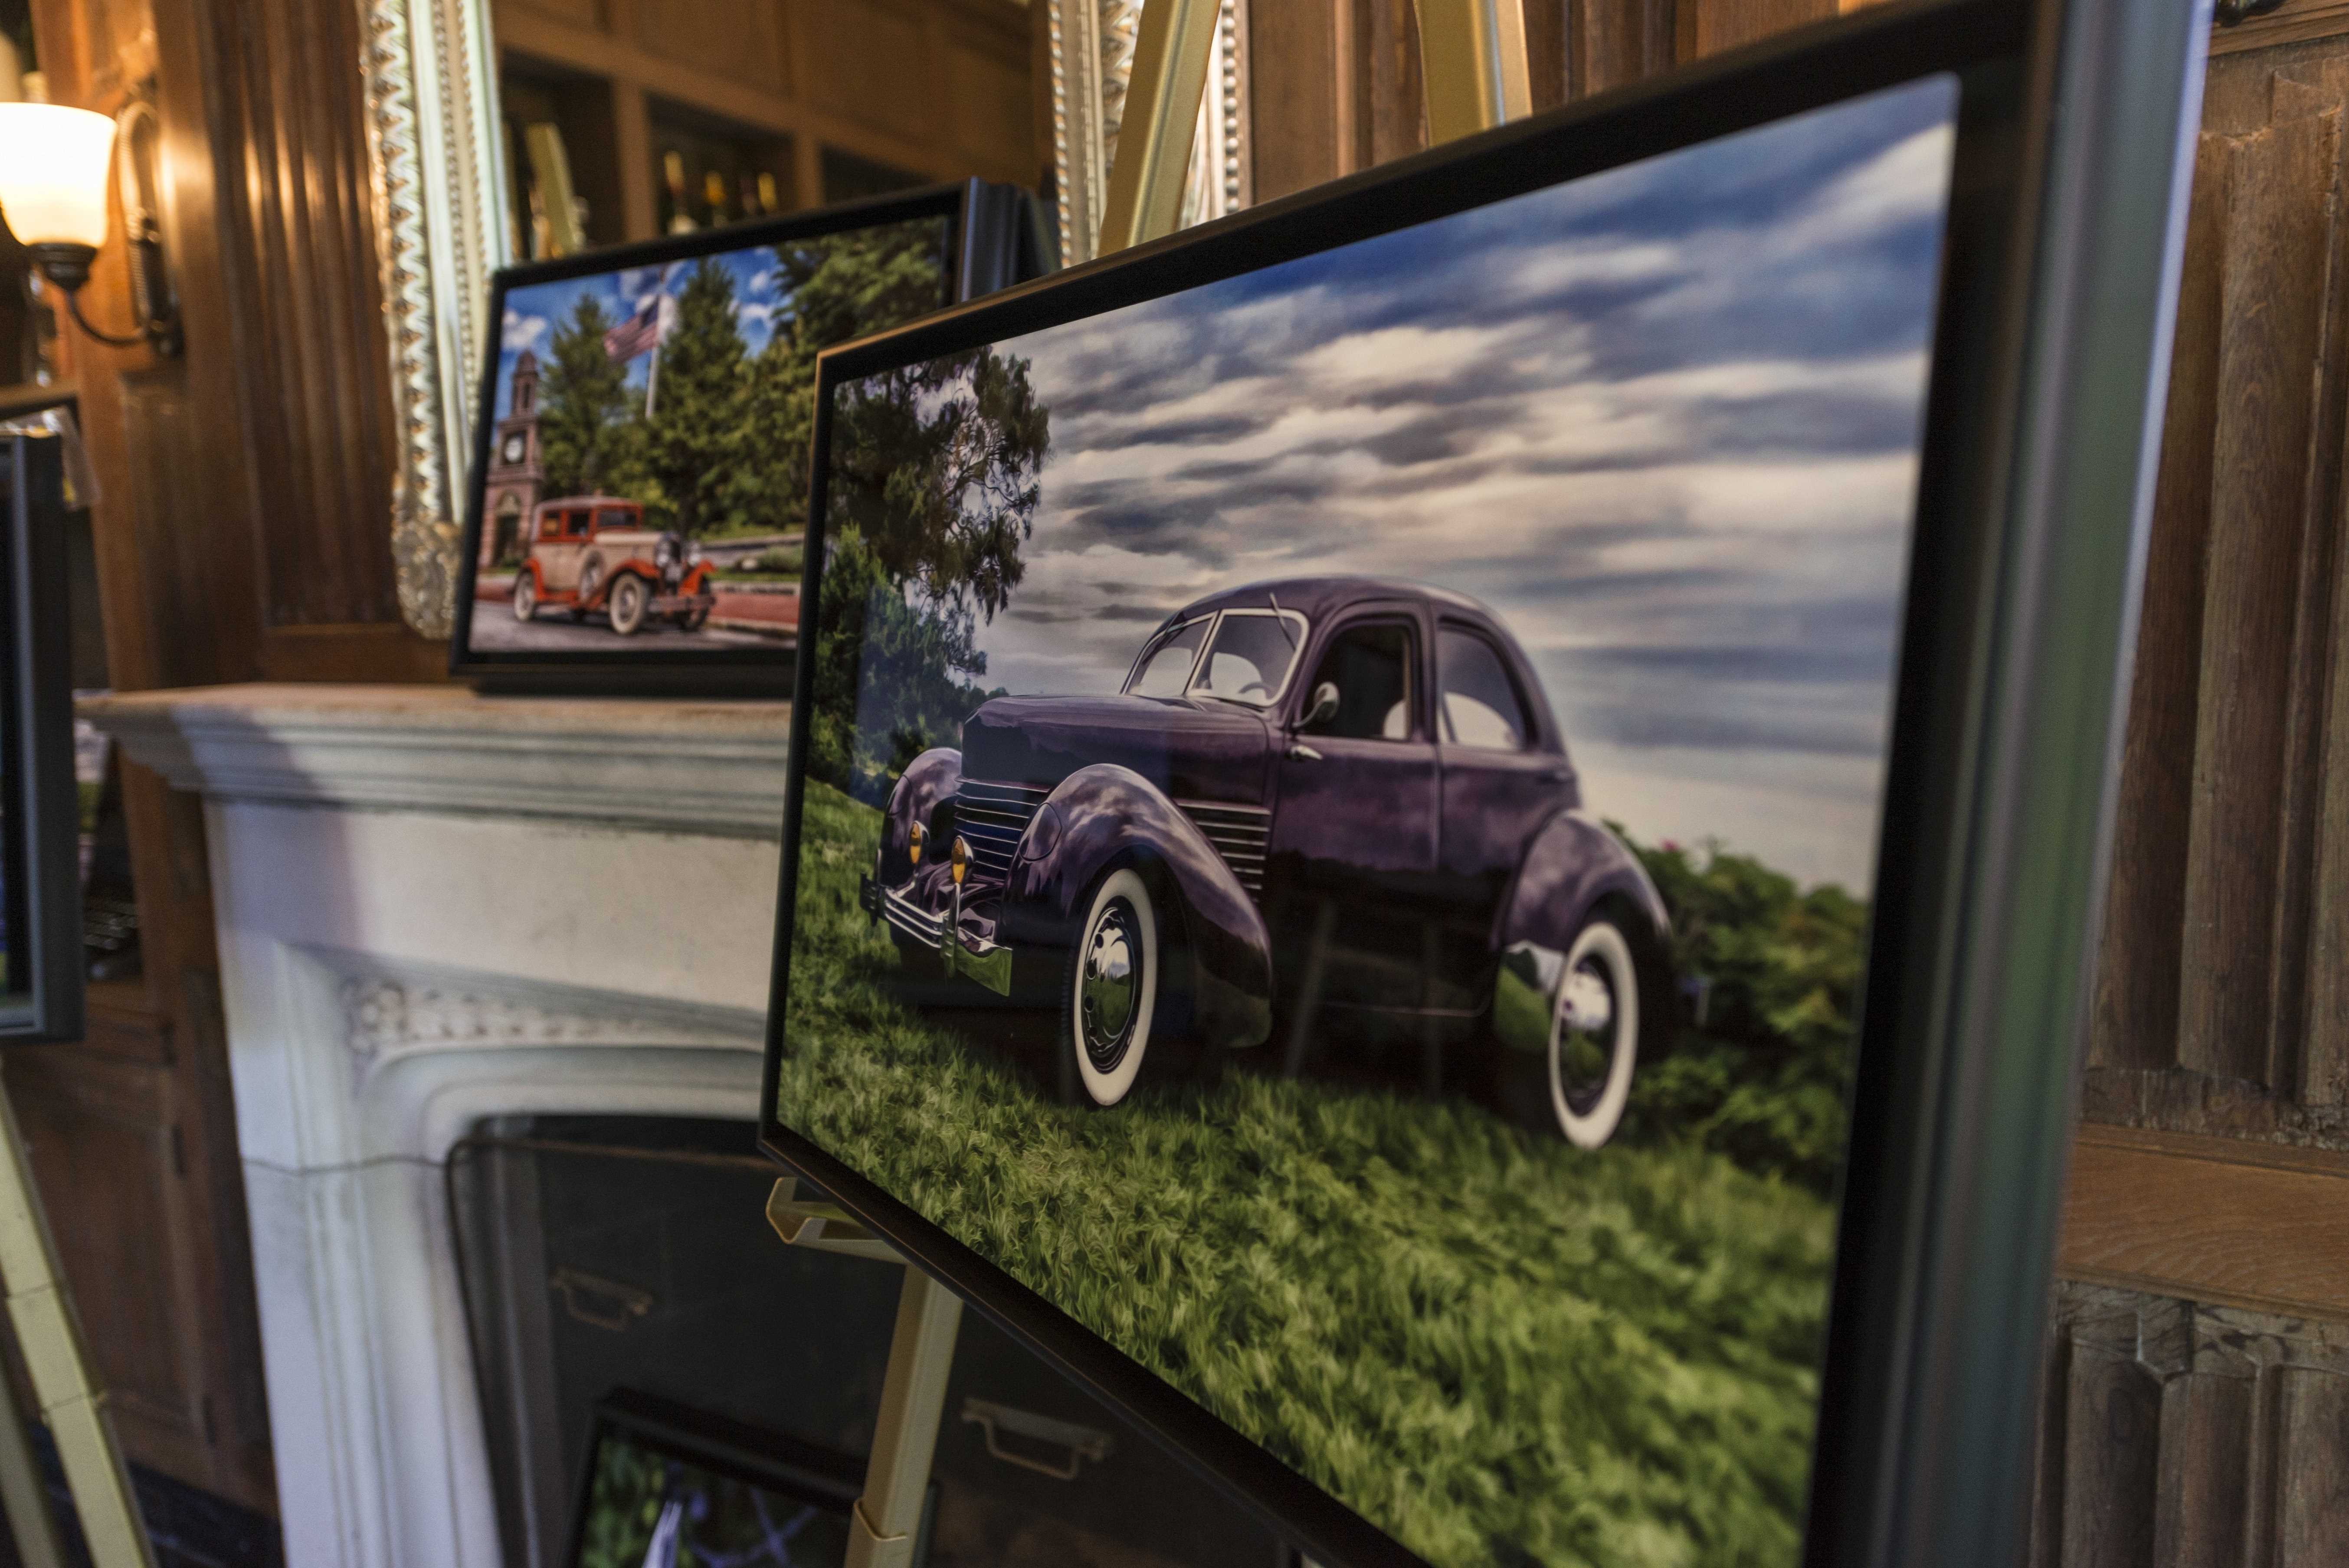 A portrait of a Concours car on display in the Misselwood library